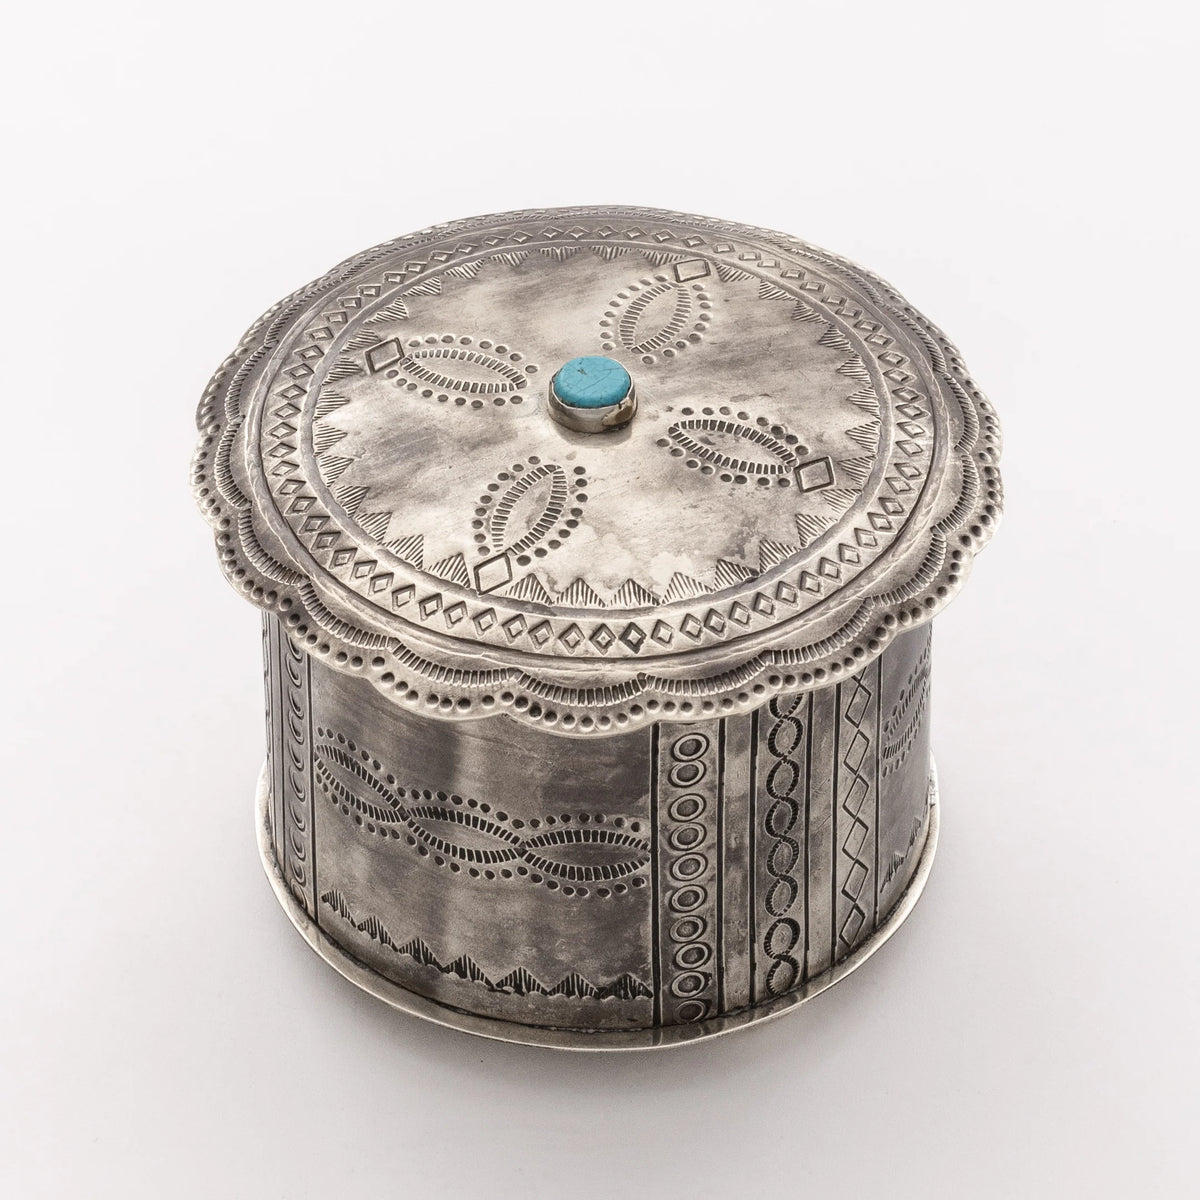 Small Stamped Round Box with Turquoise Stone by J. Alexander Rustic Silver